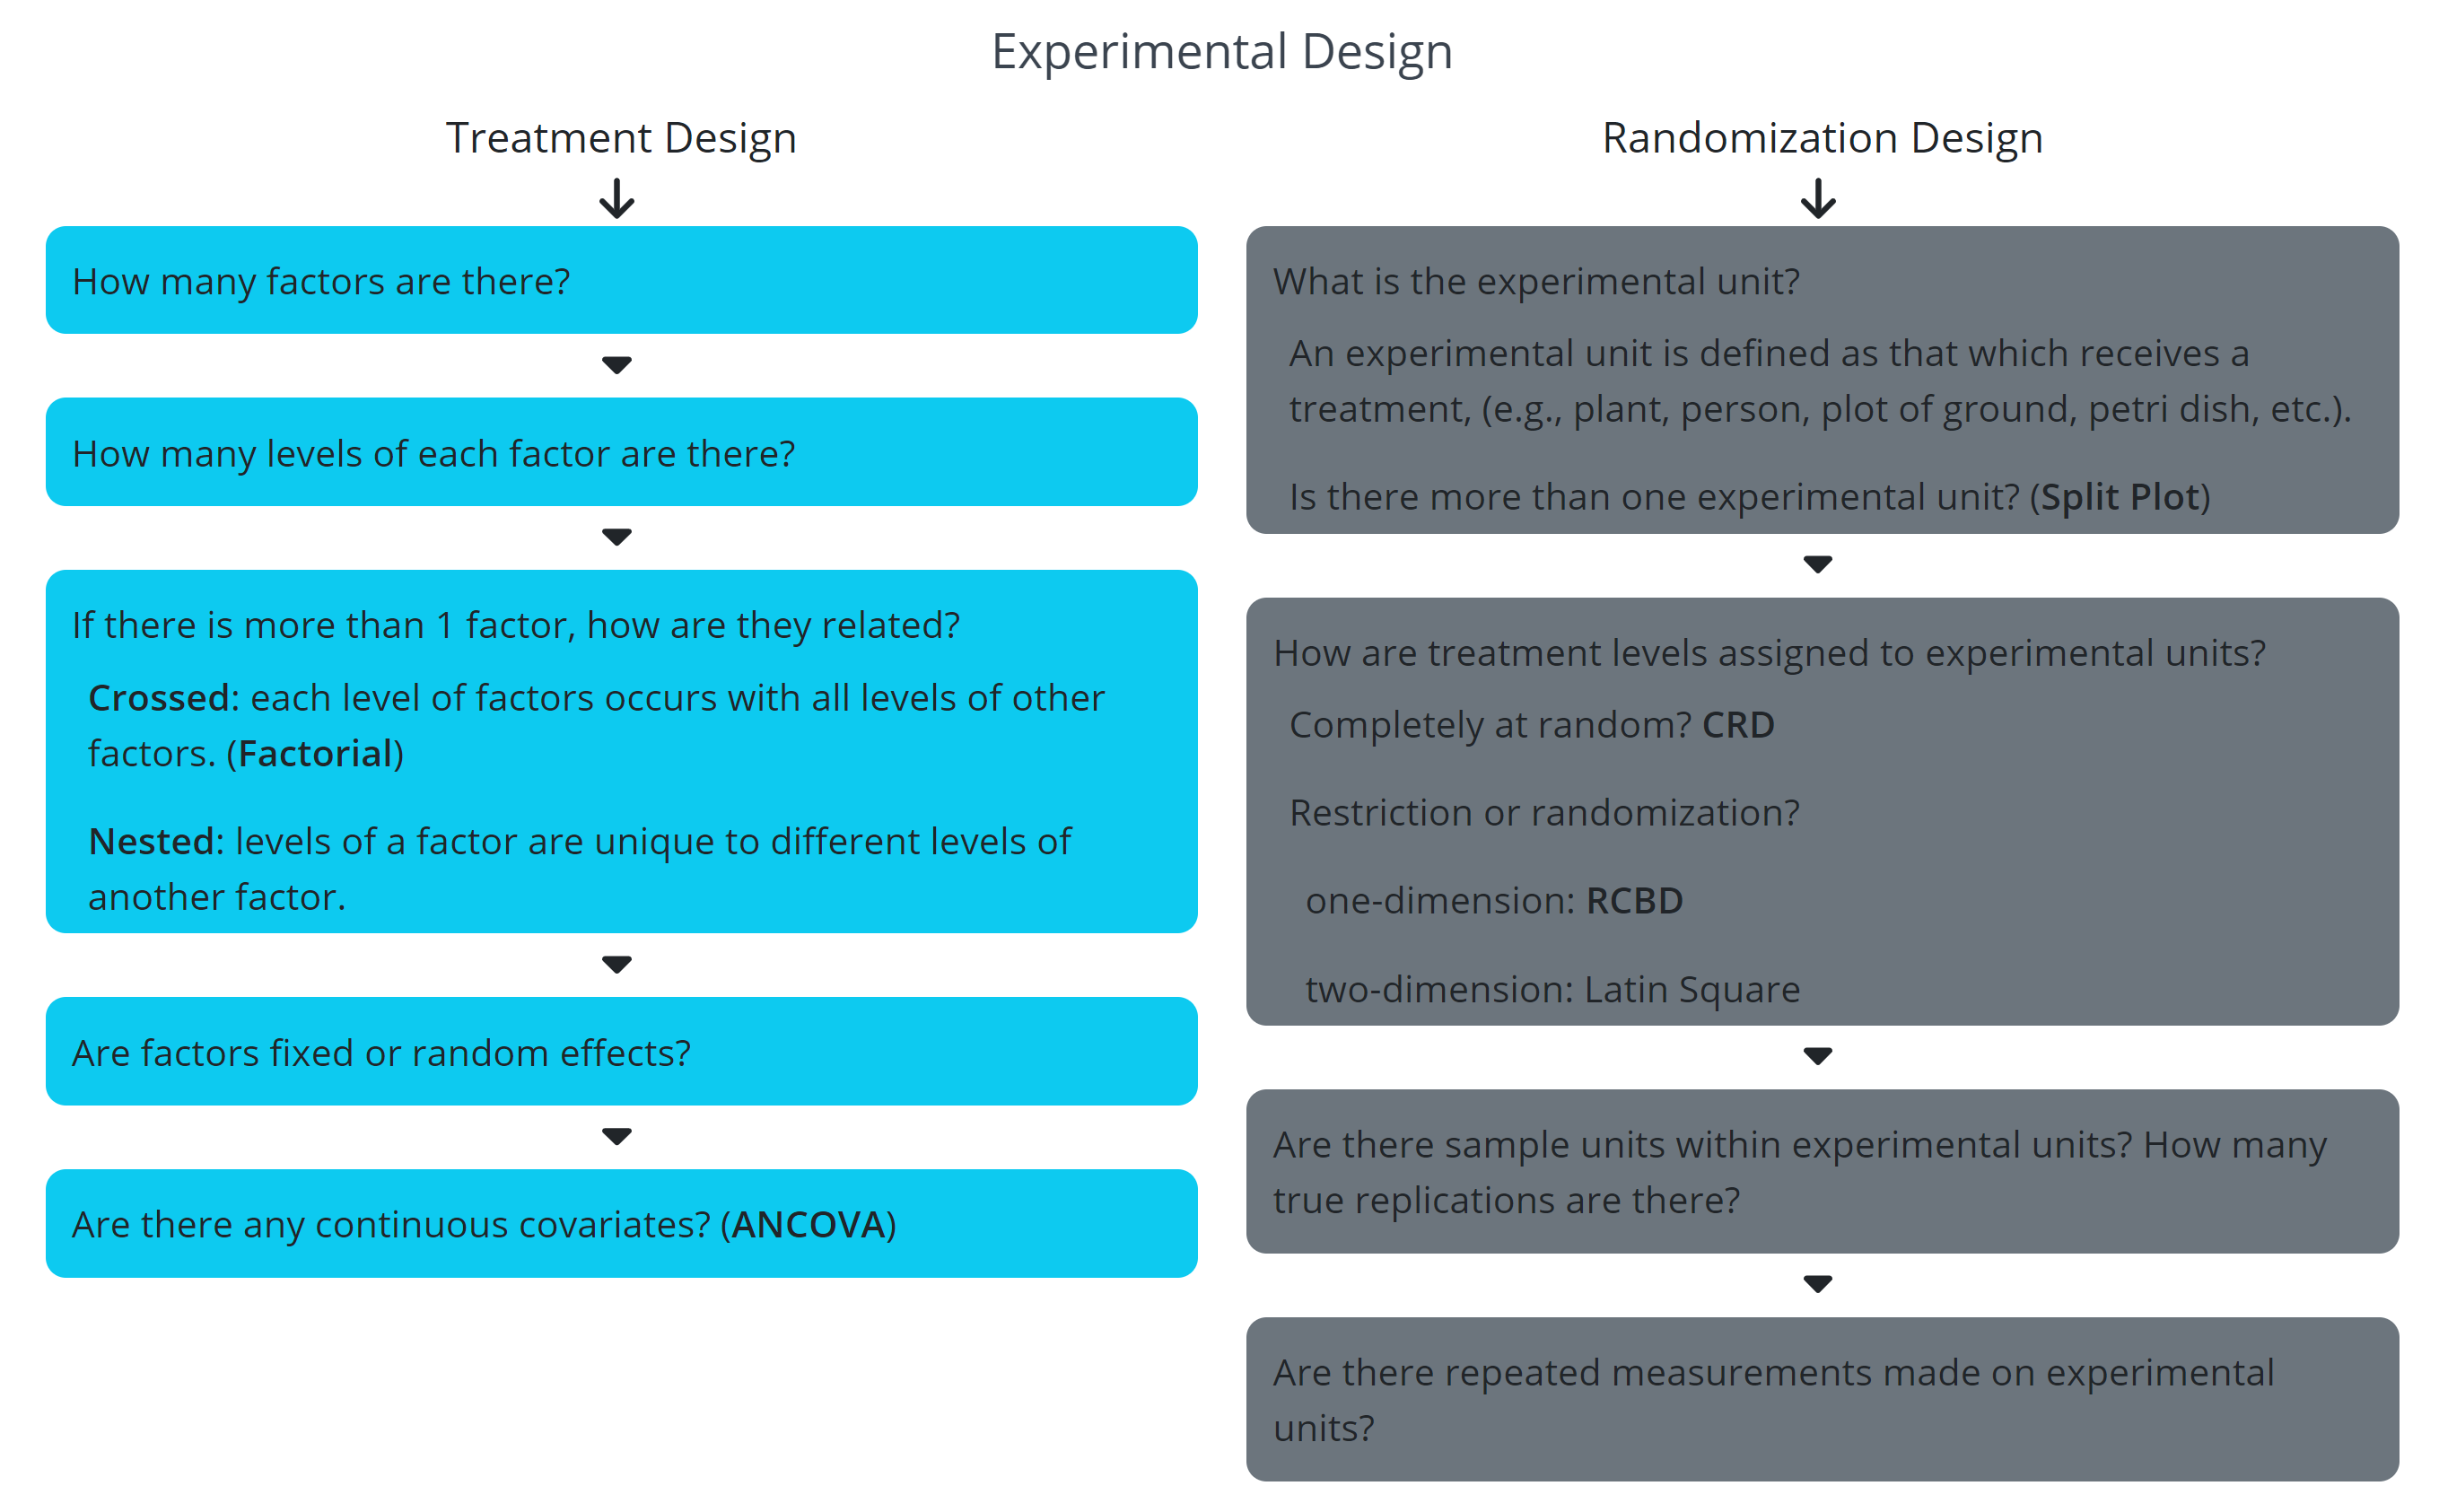 Flowchart on experimental design, with elements of treatment design on the left and randomization design on the right. Items in the randomization design flow are identifying the experimental unit, identifying how treatment levels are assigned to experimental units, identifying sample units and true replications, and identifying repeated measurements made on experimental units.